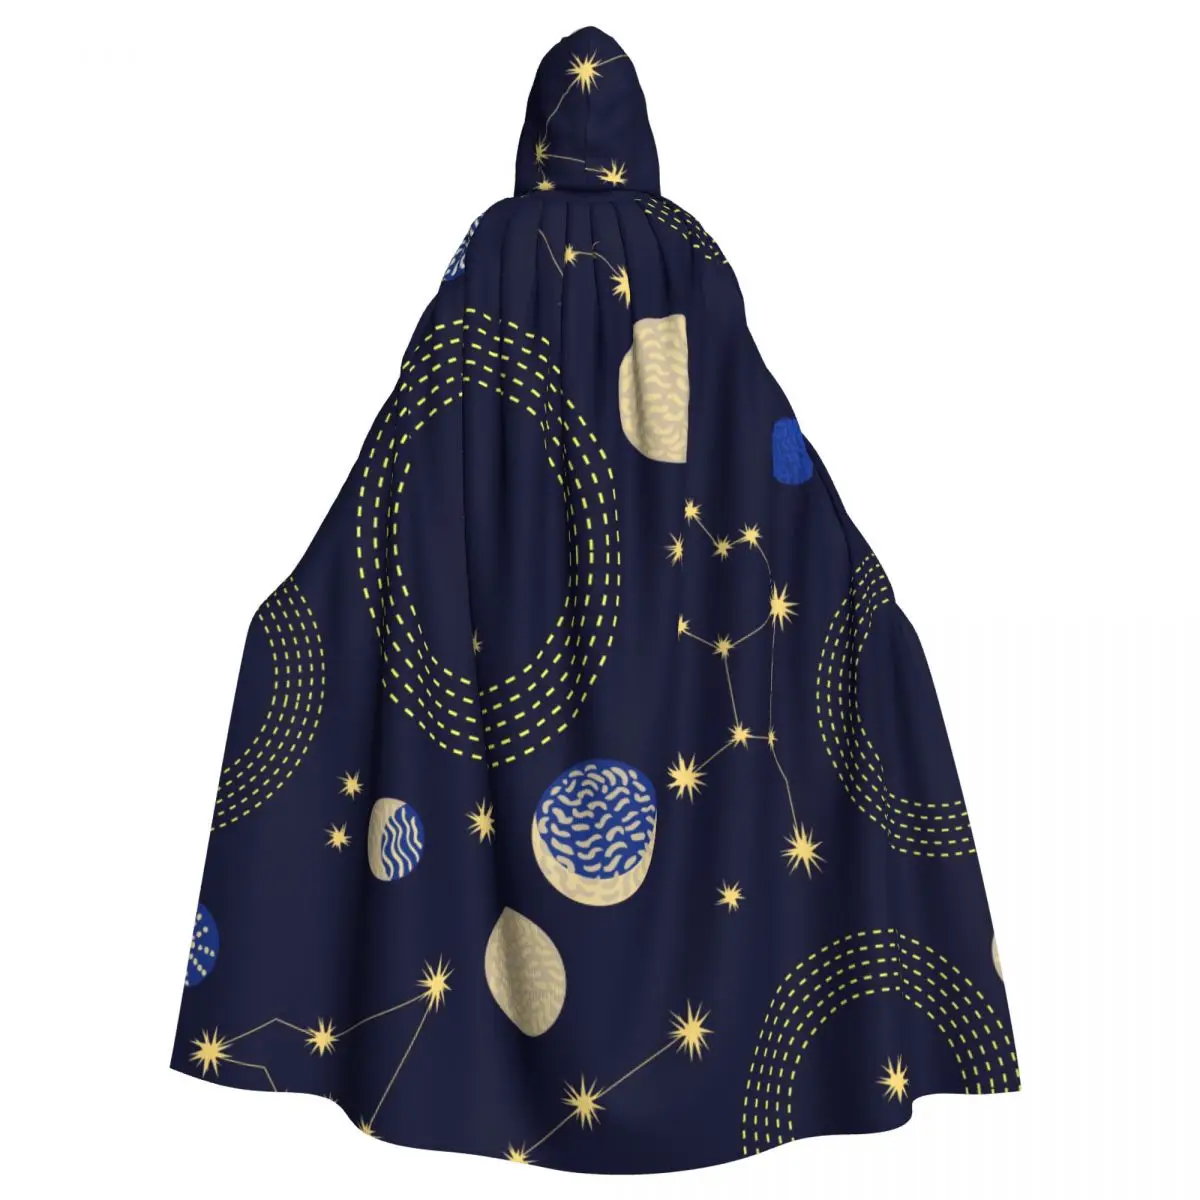 

Zodiac Sky Constellations Crescent Moon And Circlres Adult Cloak Cape Hooded Medieval Costume Vampire Elf Purim Carnival Party